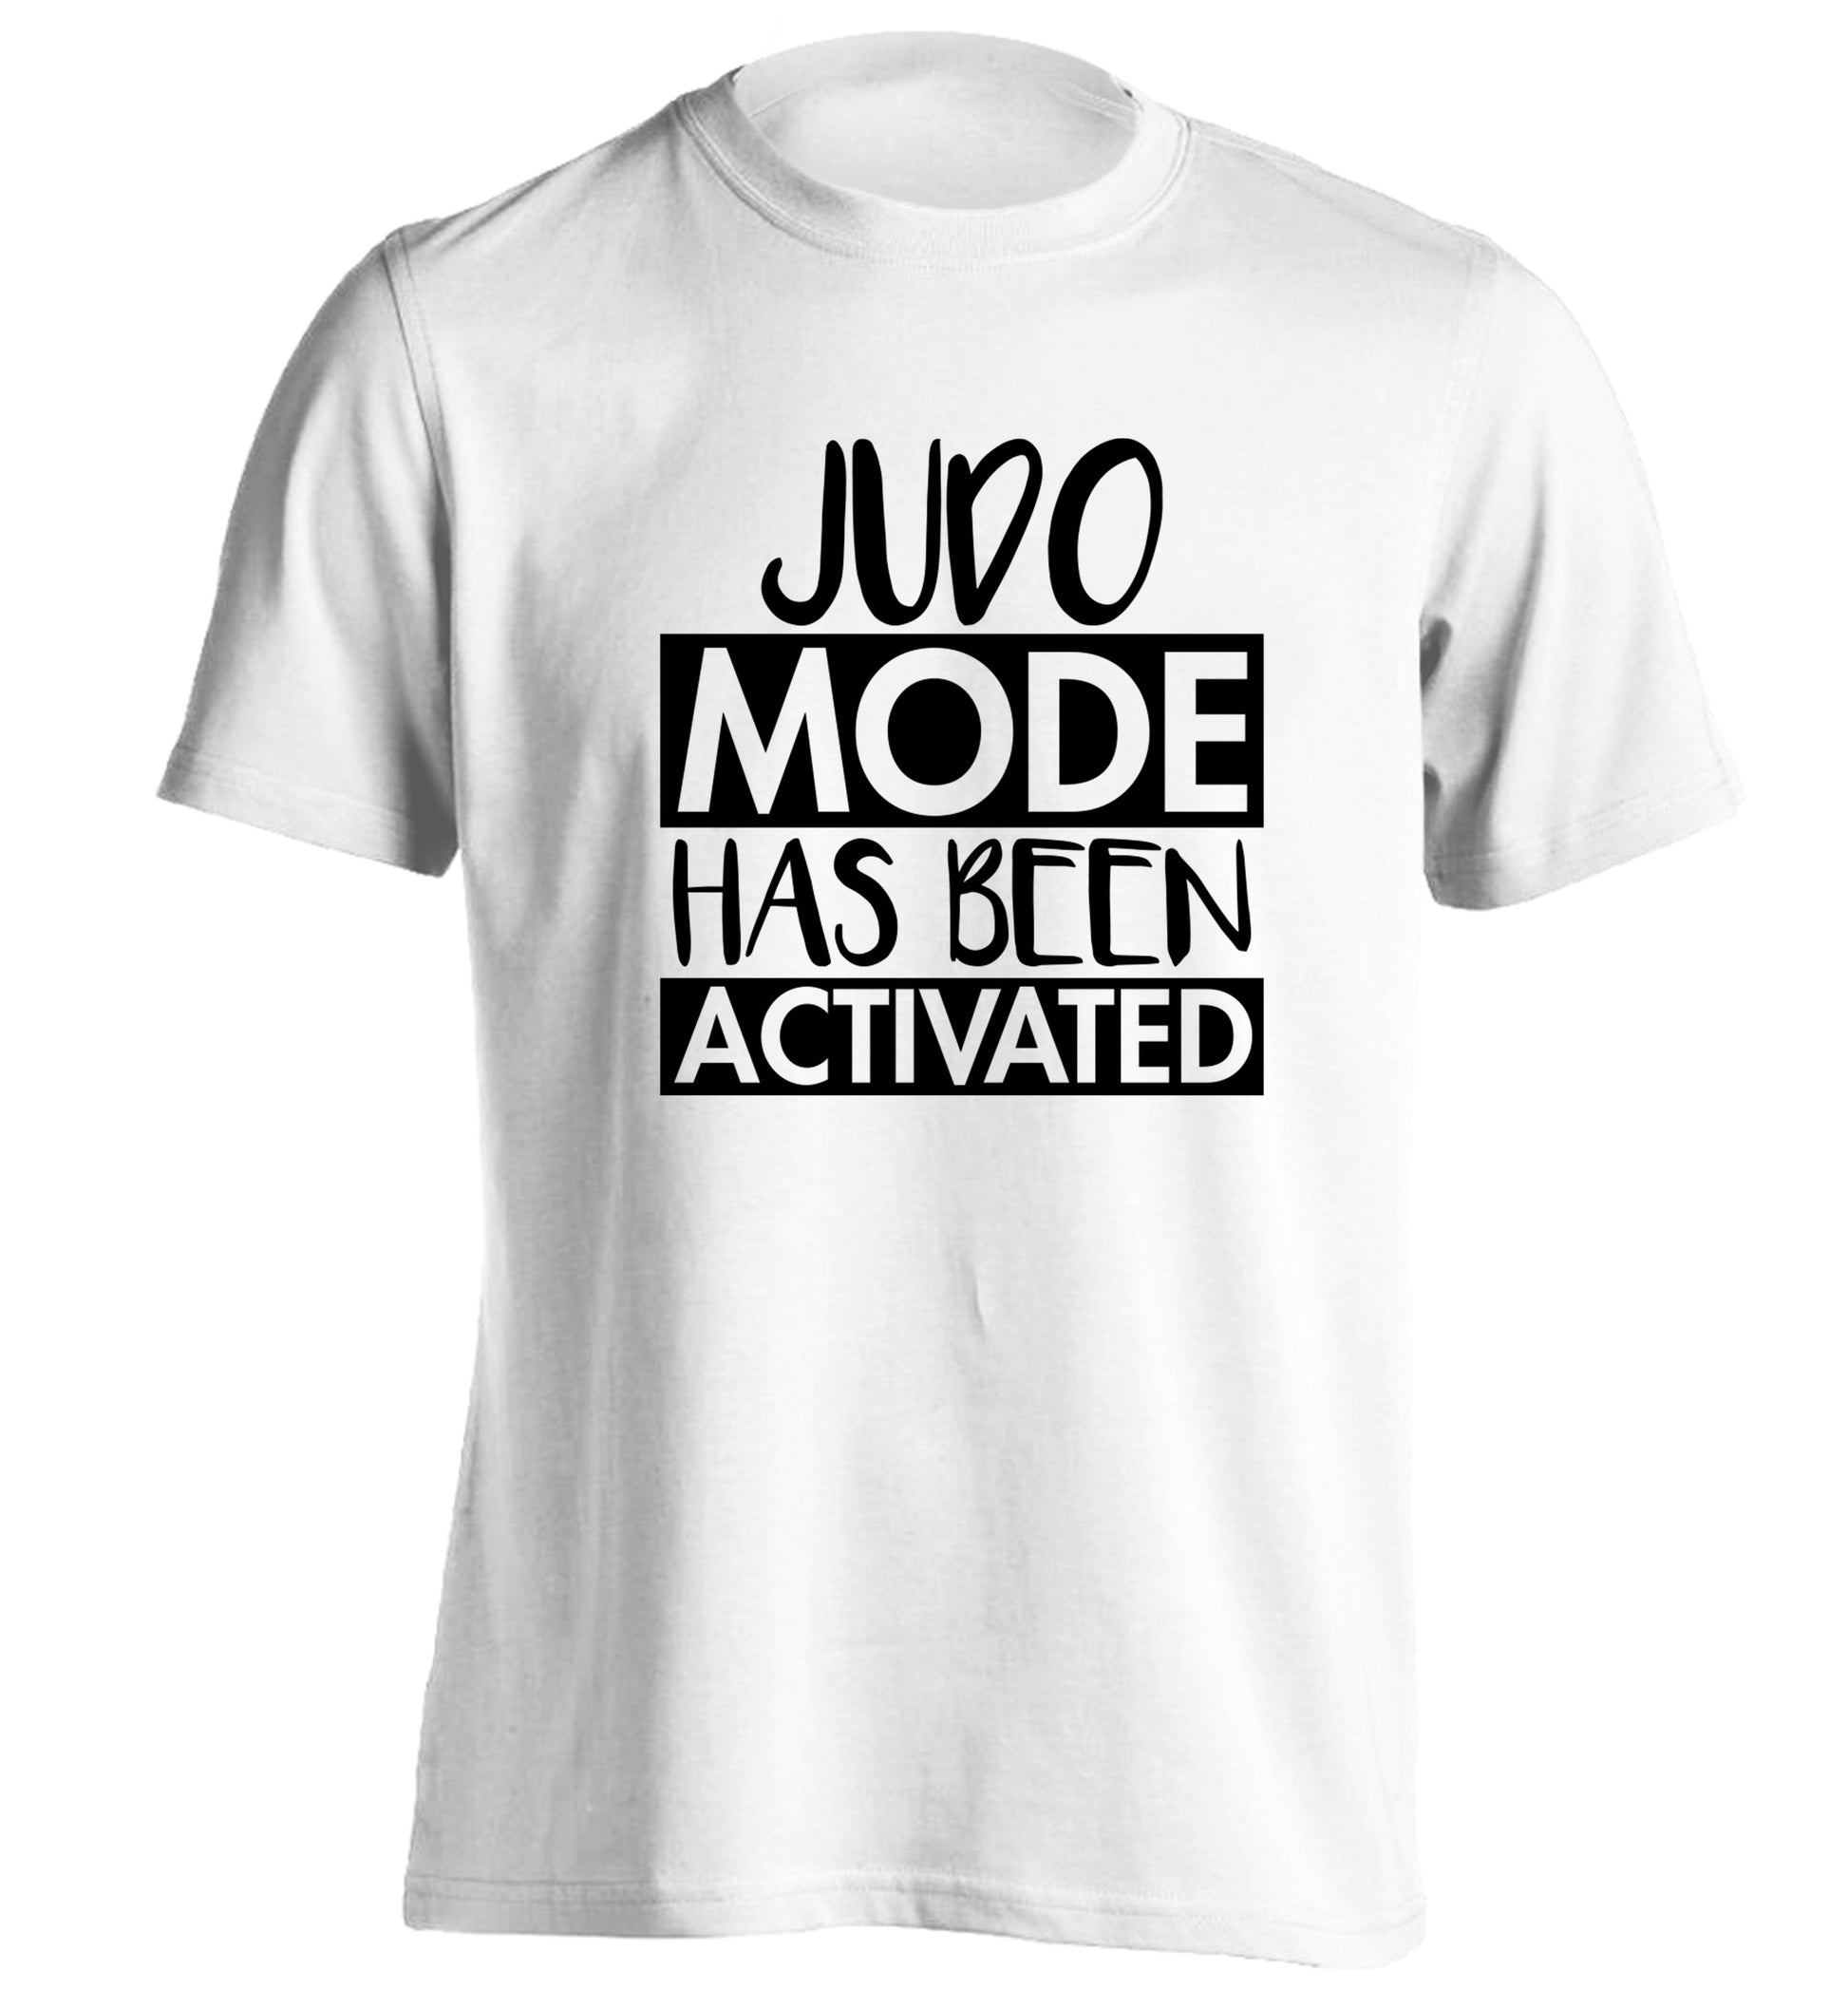 Judo mode activated adults unisex white Tshirt 2XL